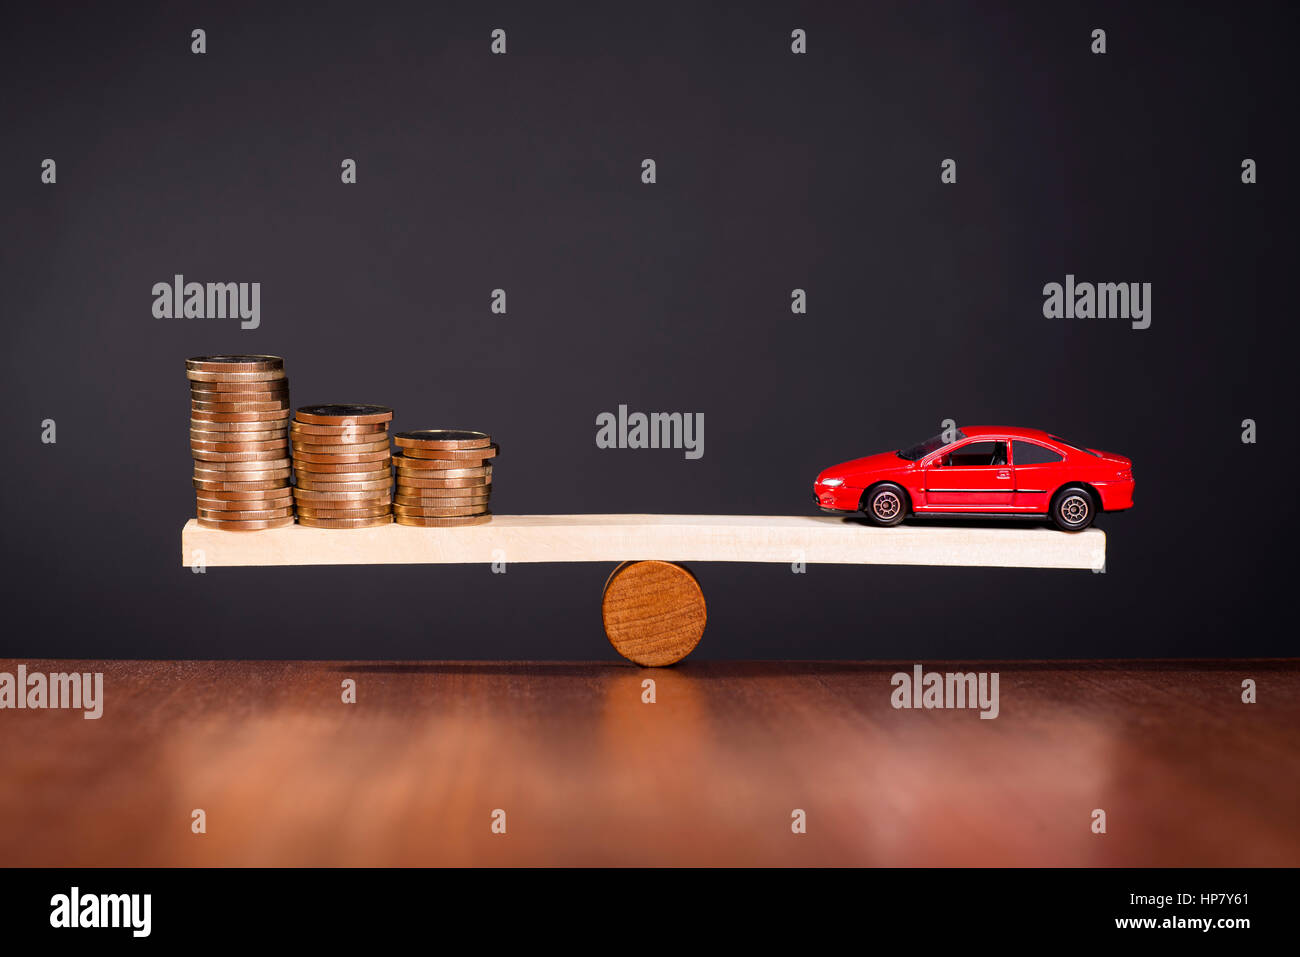 Seesaw with a car on one side and stack of money on the other side. Stock Photo